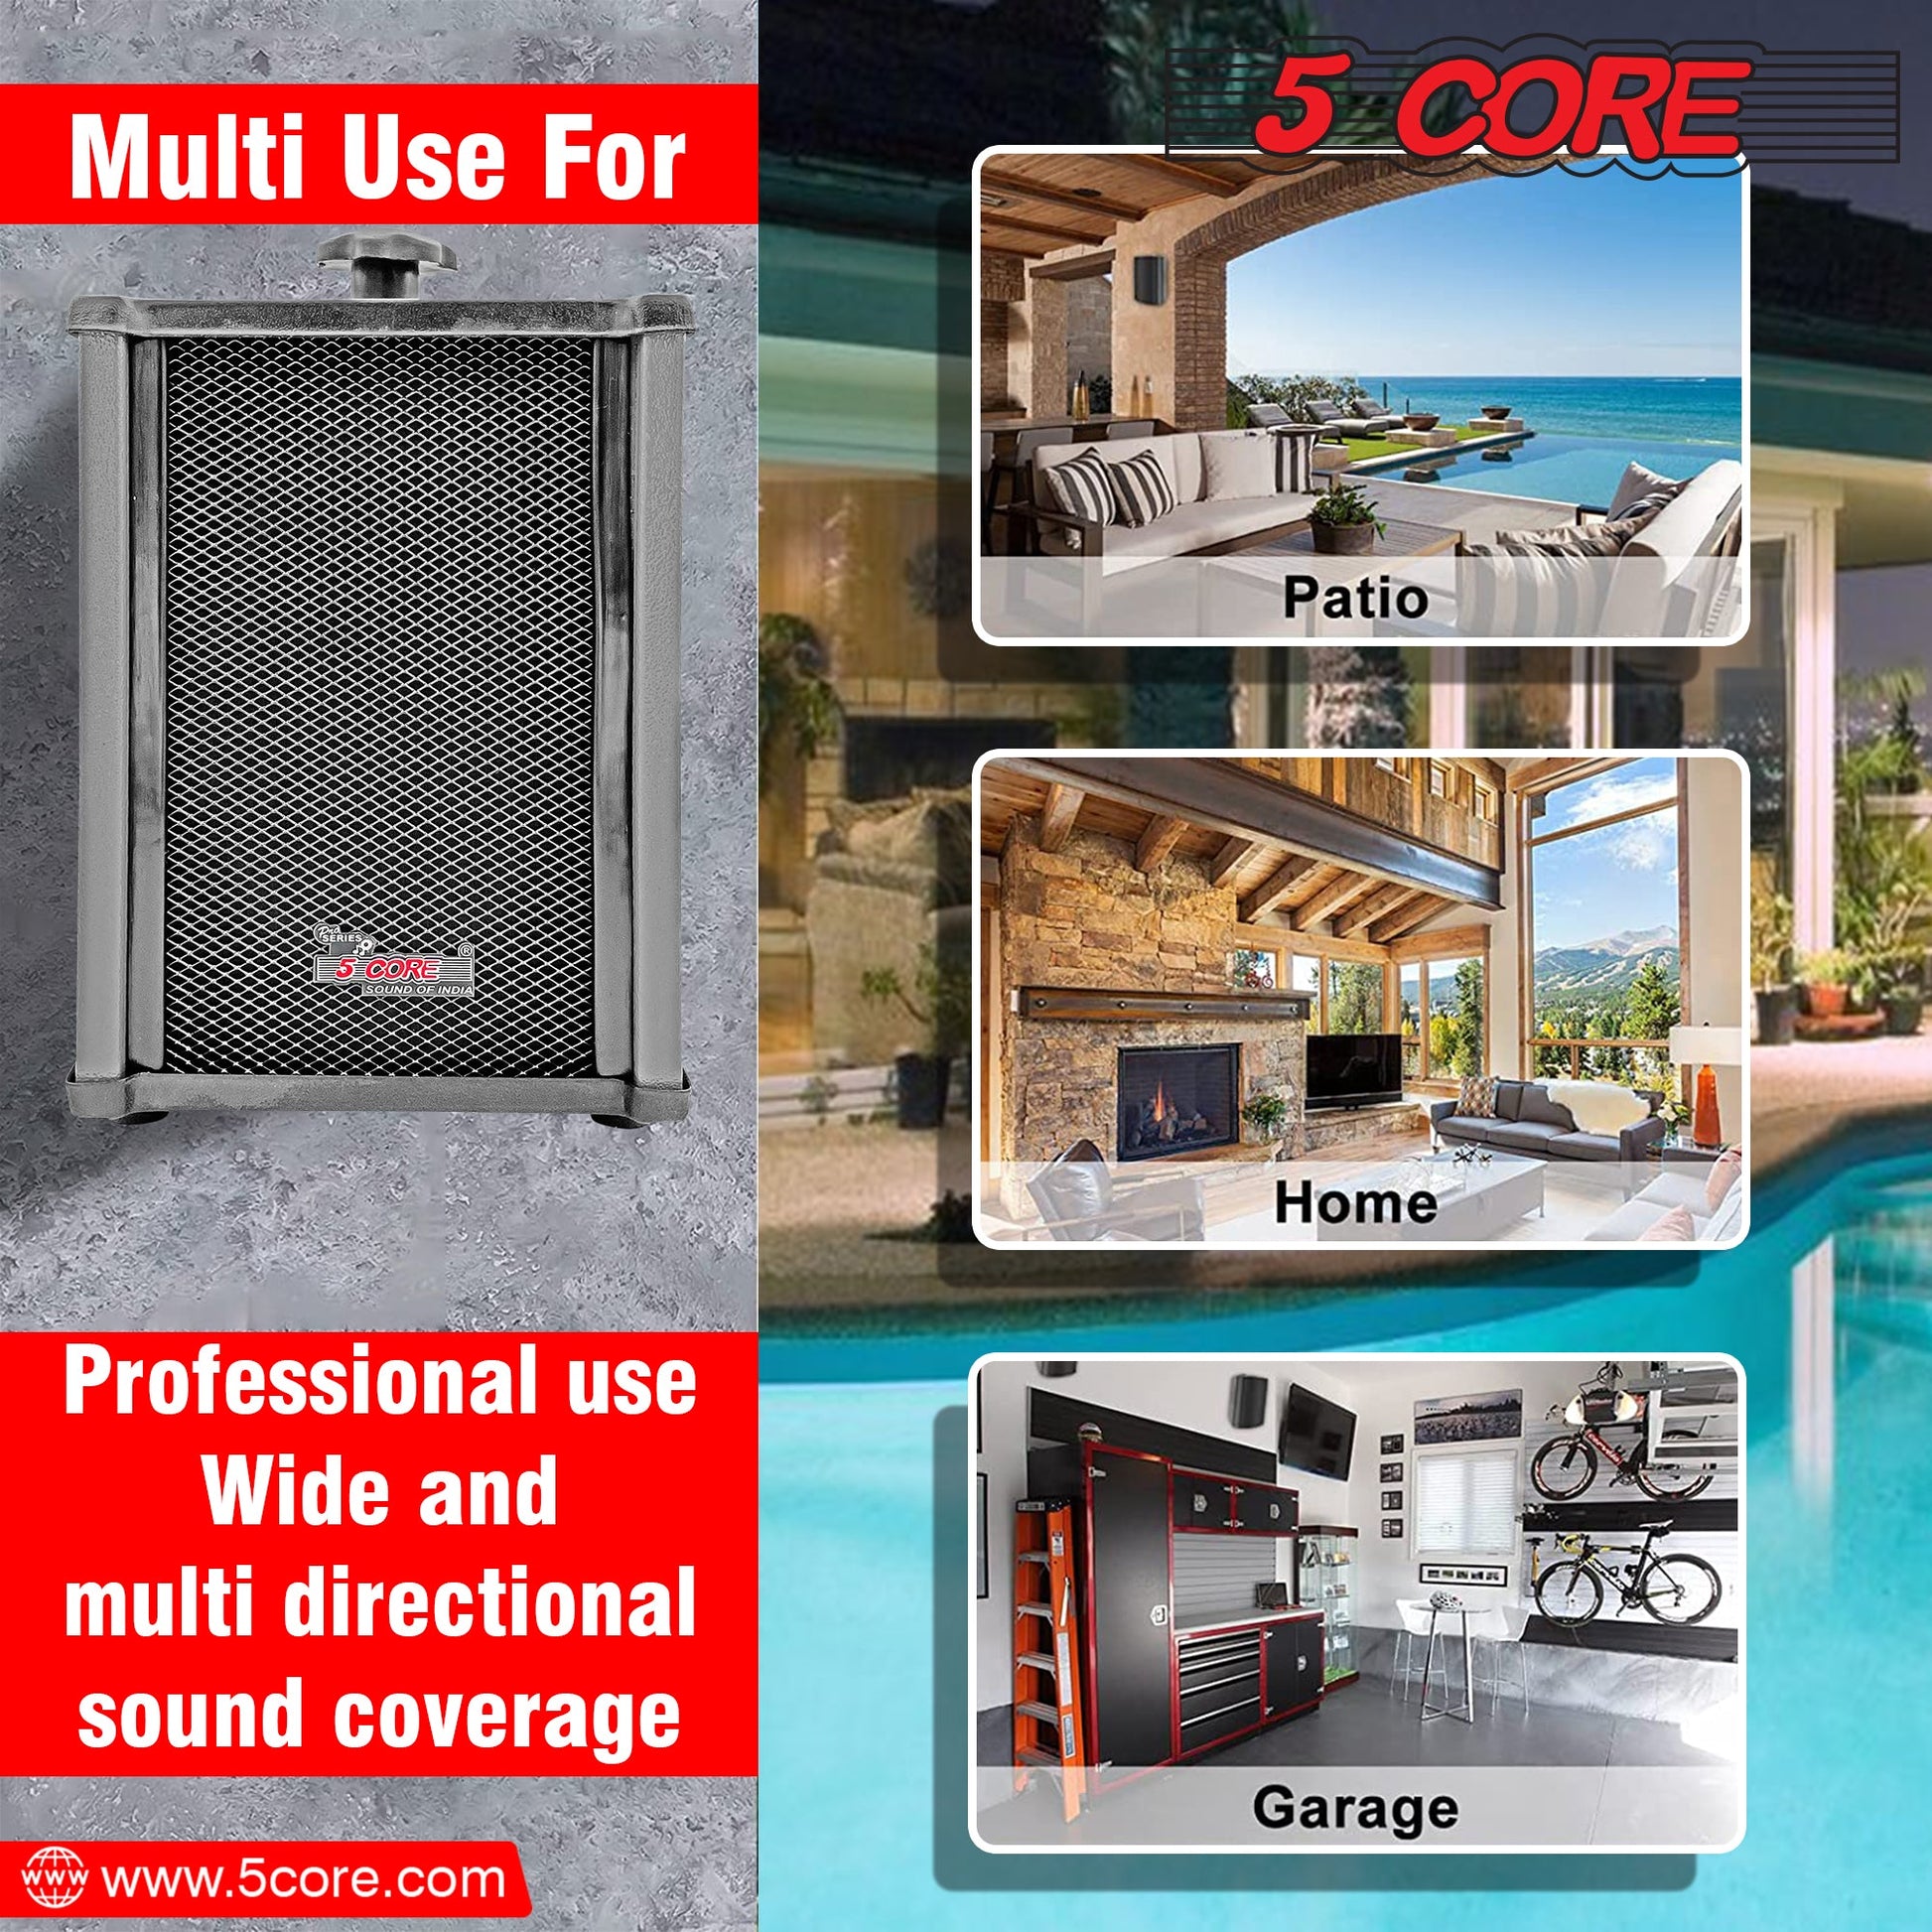 5 CORE 6x4 Inch In Wall Speaker Pair High Performance 10 Watt Outdoor Indoor Speaker with Effortless Mounting Swivel | All Weather Resistance | Stereo Sound for Home Theatre, Patio, Garden Grey 10T G 2PCS-7